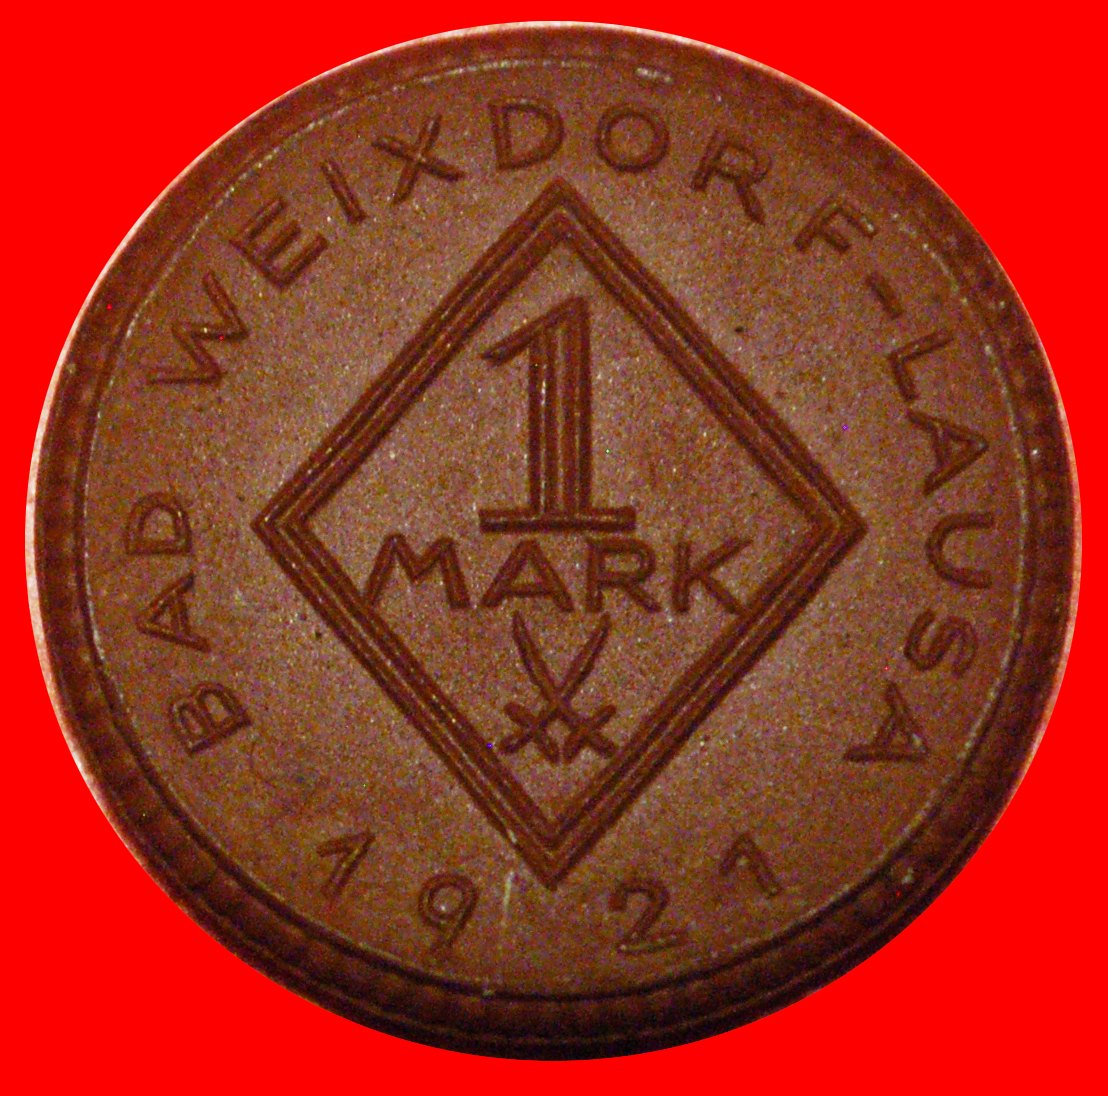  * SNAKE ASTRONOMY: GERMANY BAD WEIXDORF-LAUSA ★ 1 MARK 1921 BROWN PORCELAIN LOW START! ★ NO RESERVE!   